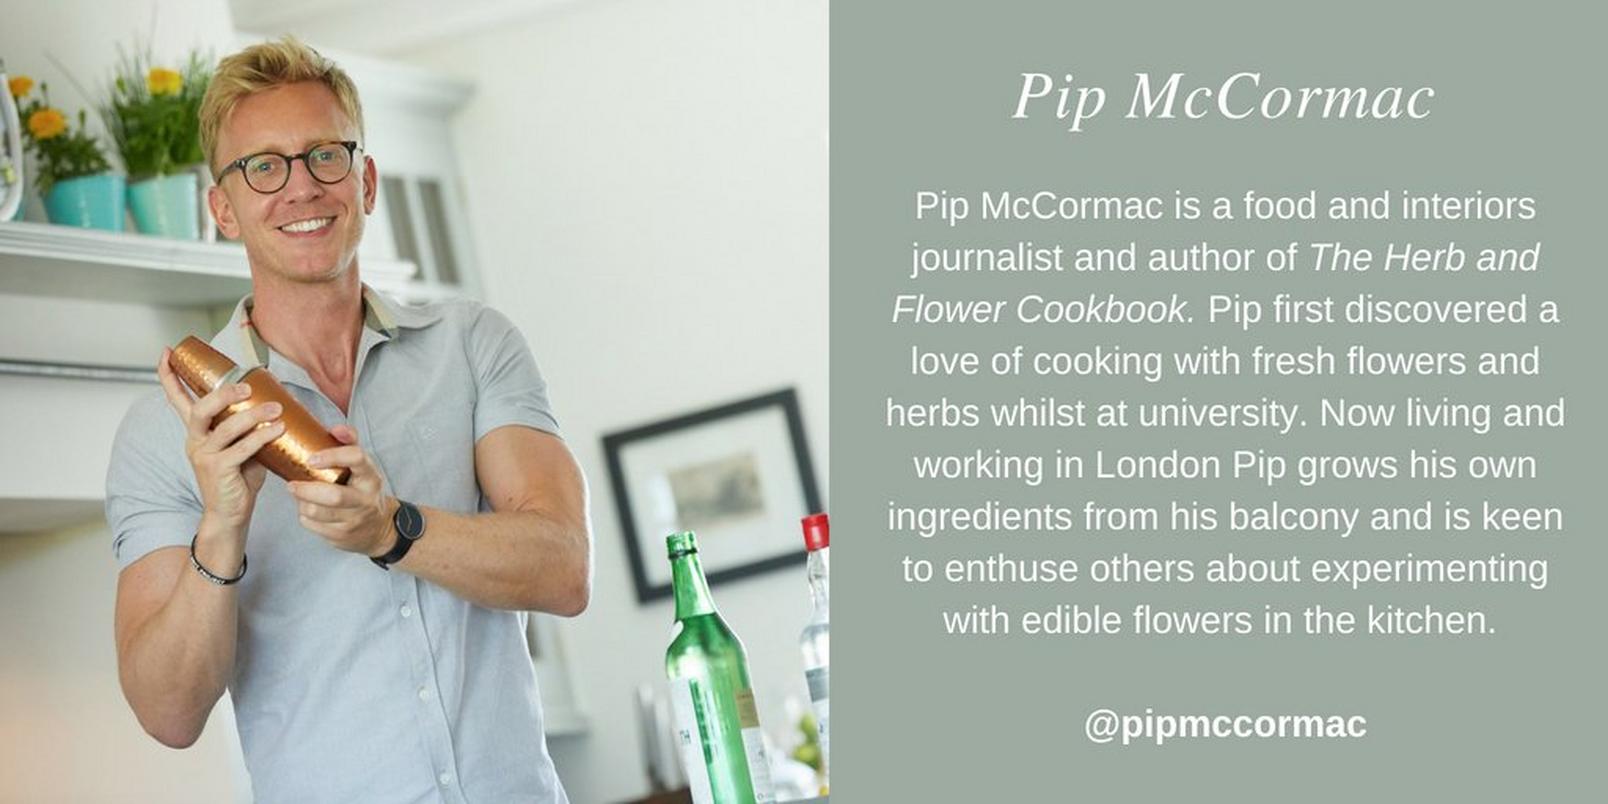 pip-mccormac-quoting-making-cocktails